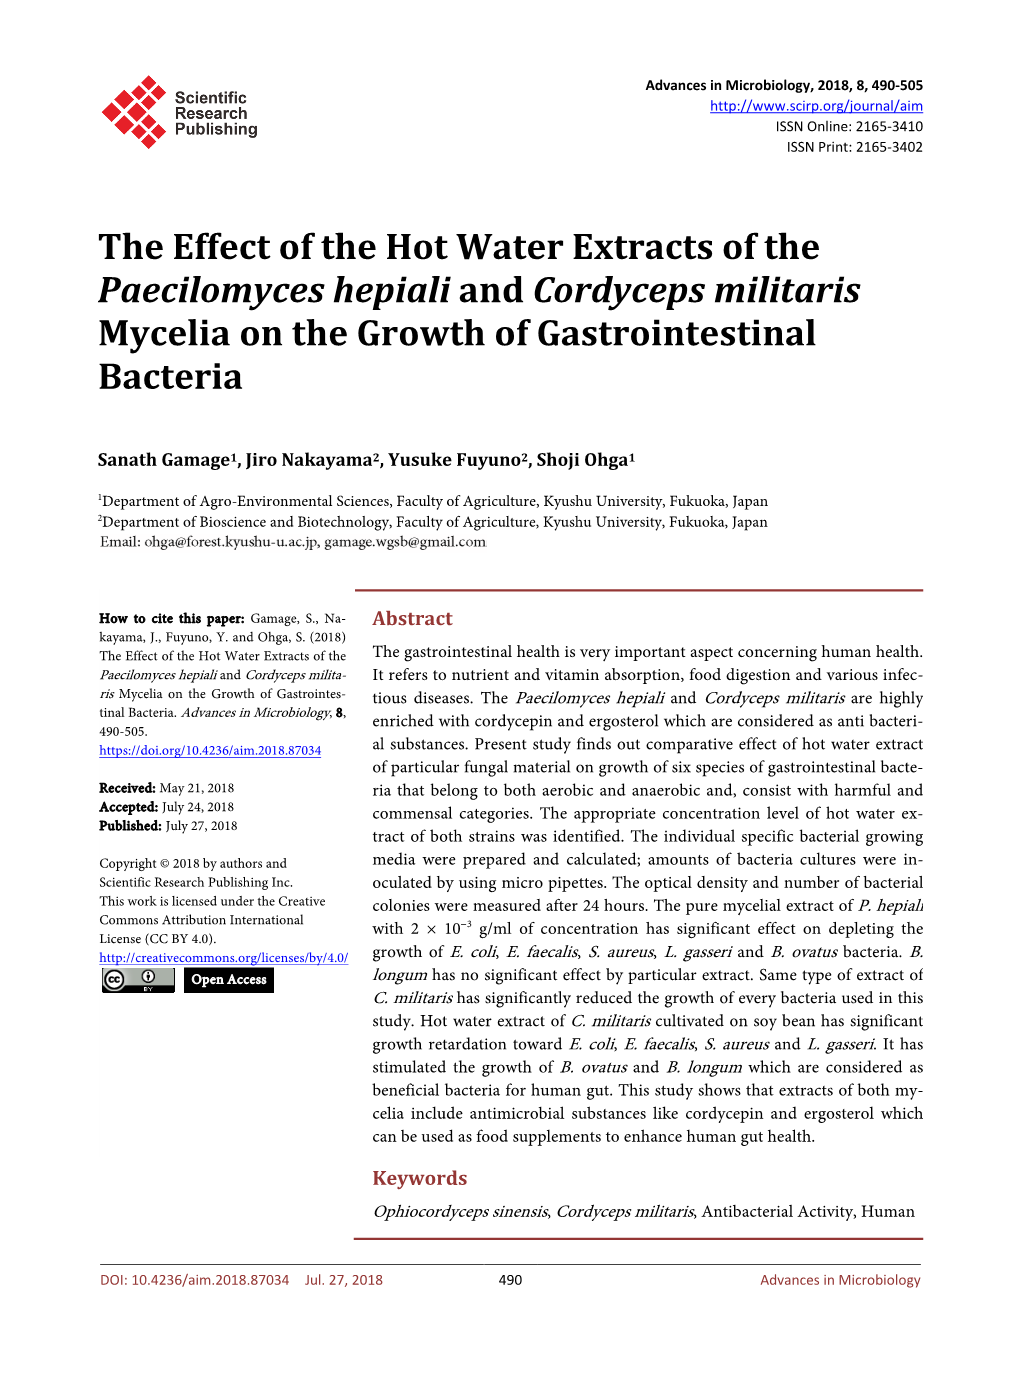 The Effect of the Hot Water Extracts of the Paecilomyces Hepiali and Cordyceps Militaris Mycelia on the Growth of Gastrointestinal Bacteria